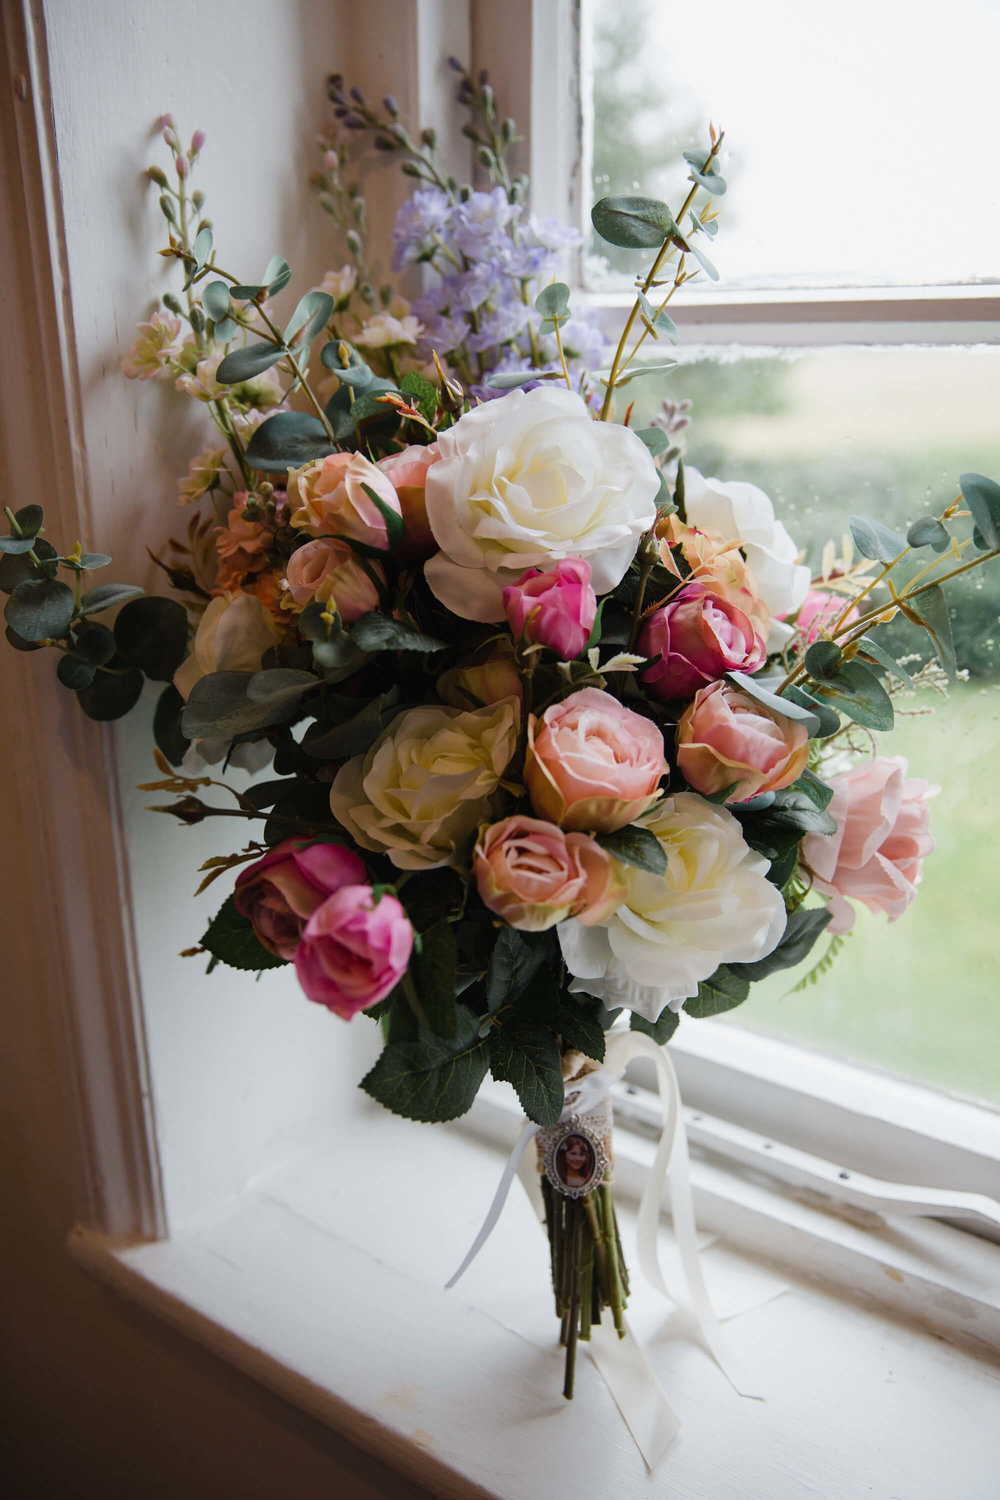 bouquet of flowers resting upright in window as natural light shines in